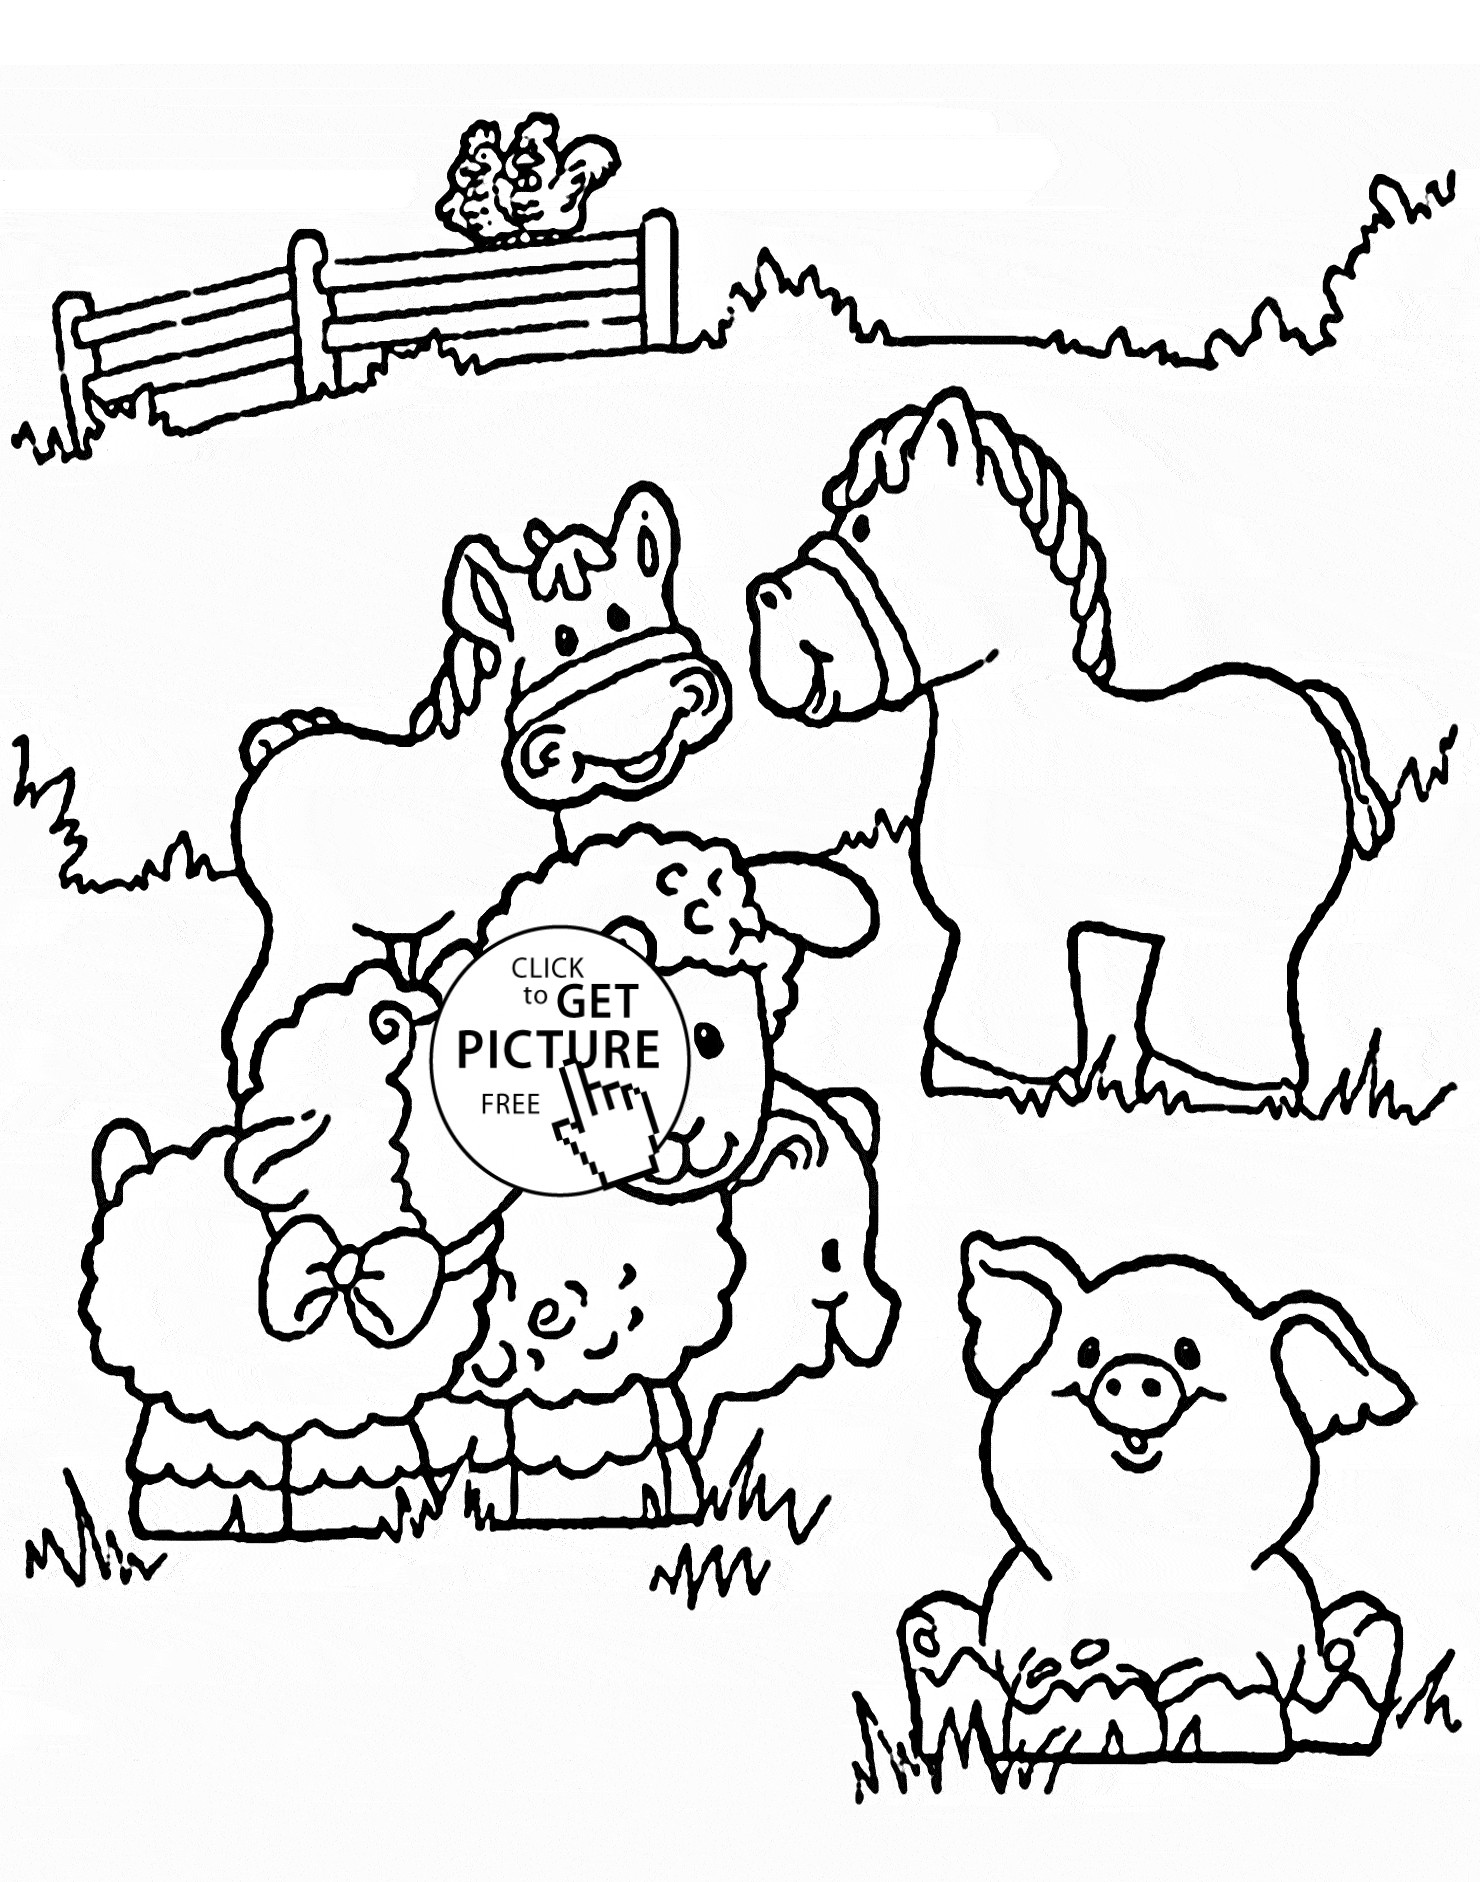 Funny Farm Animals coloring page for kids animal coloring pages printables free Wuppsy